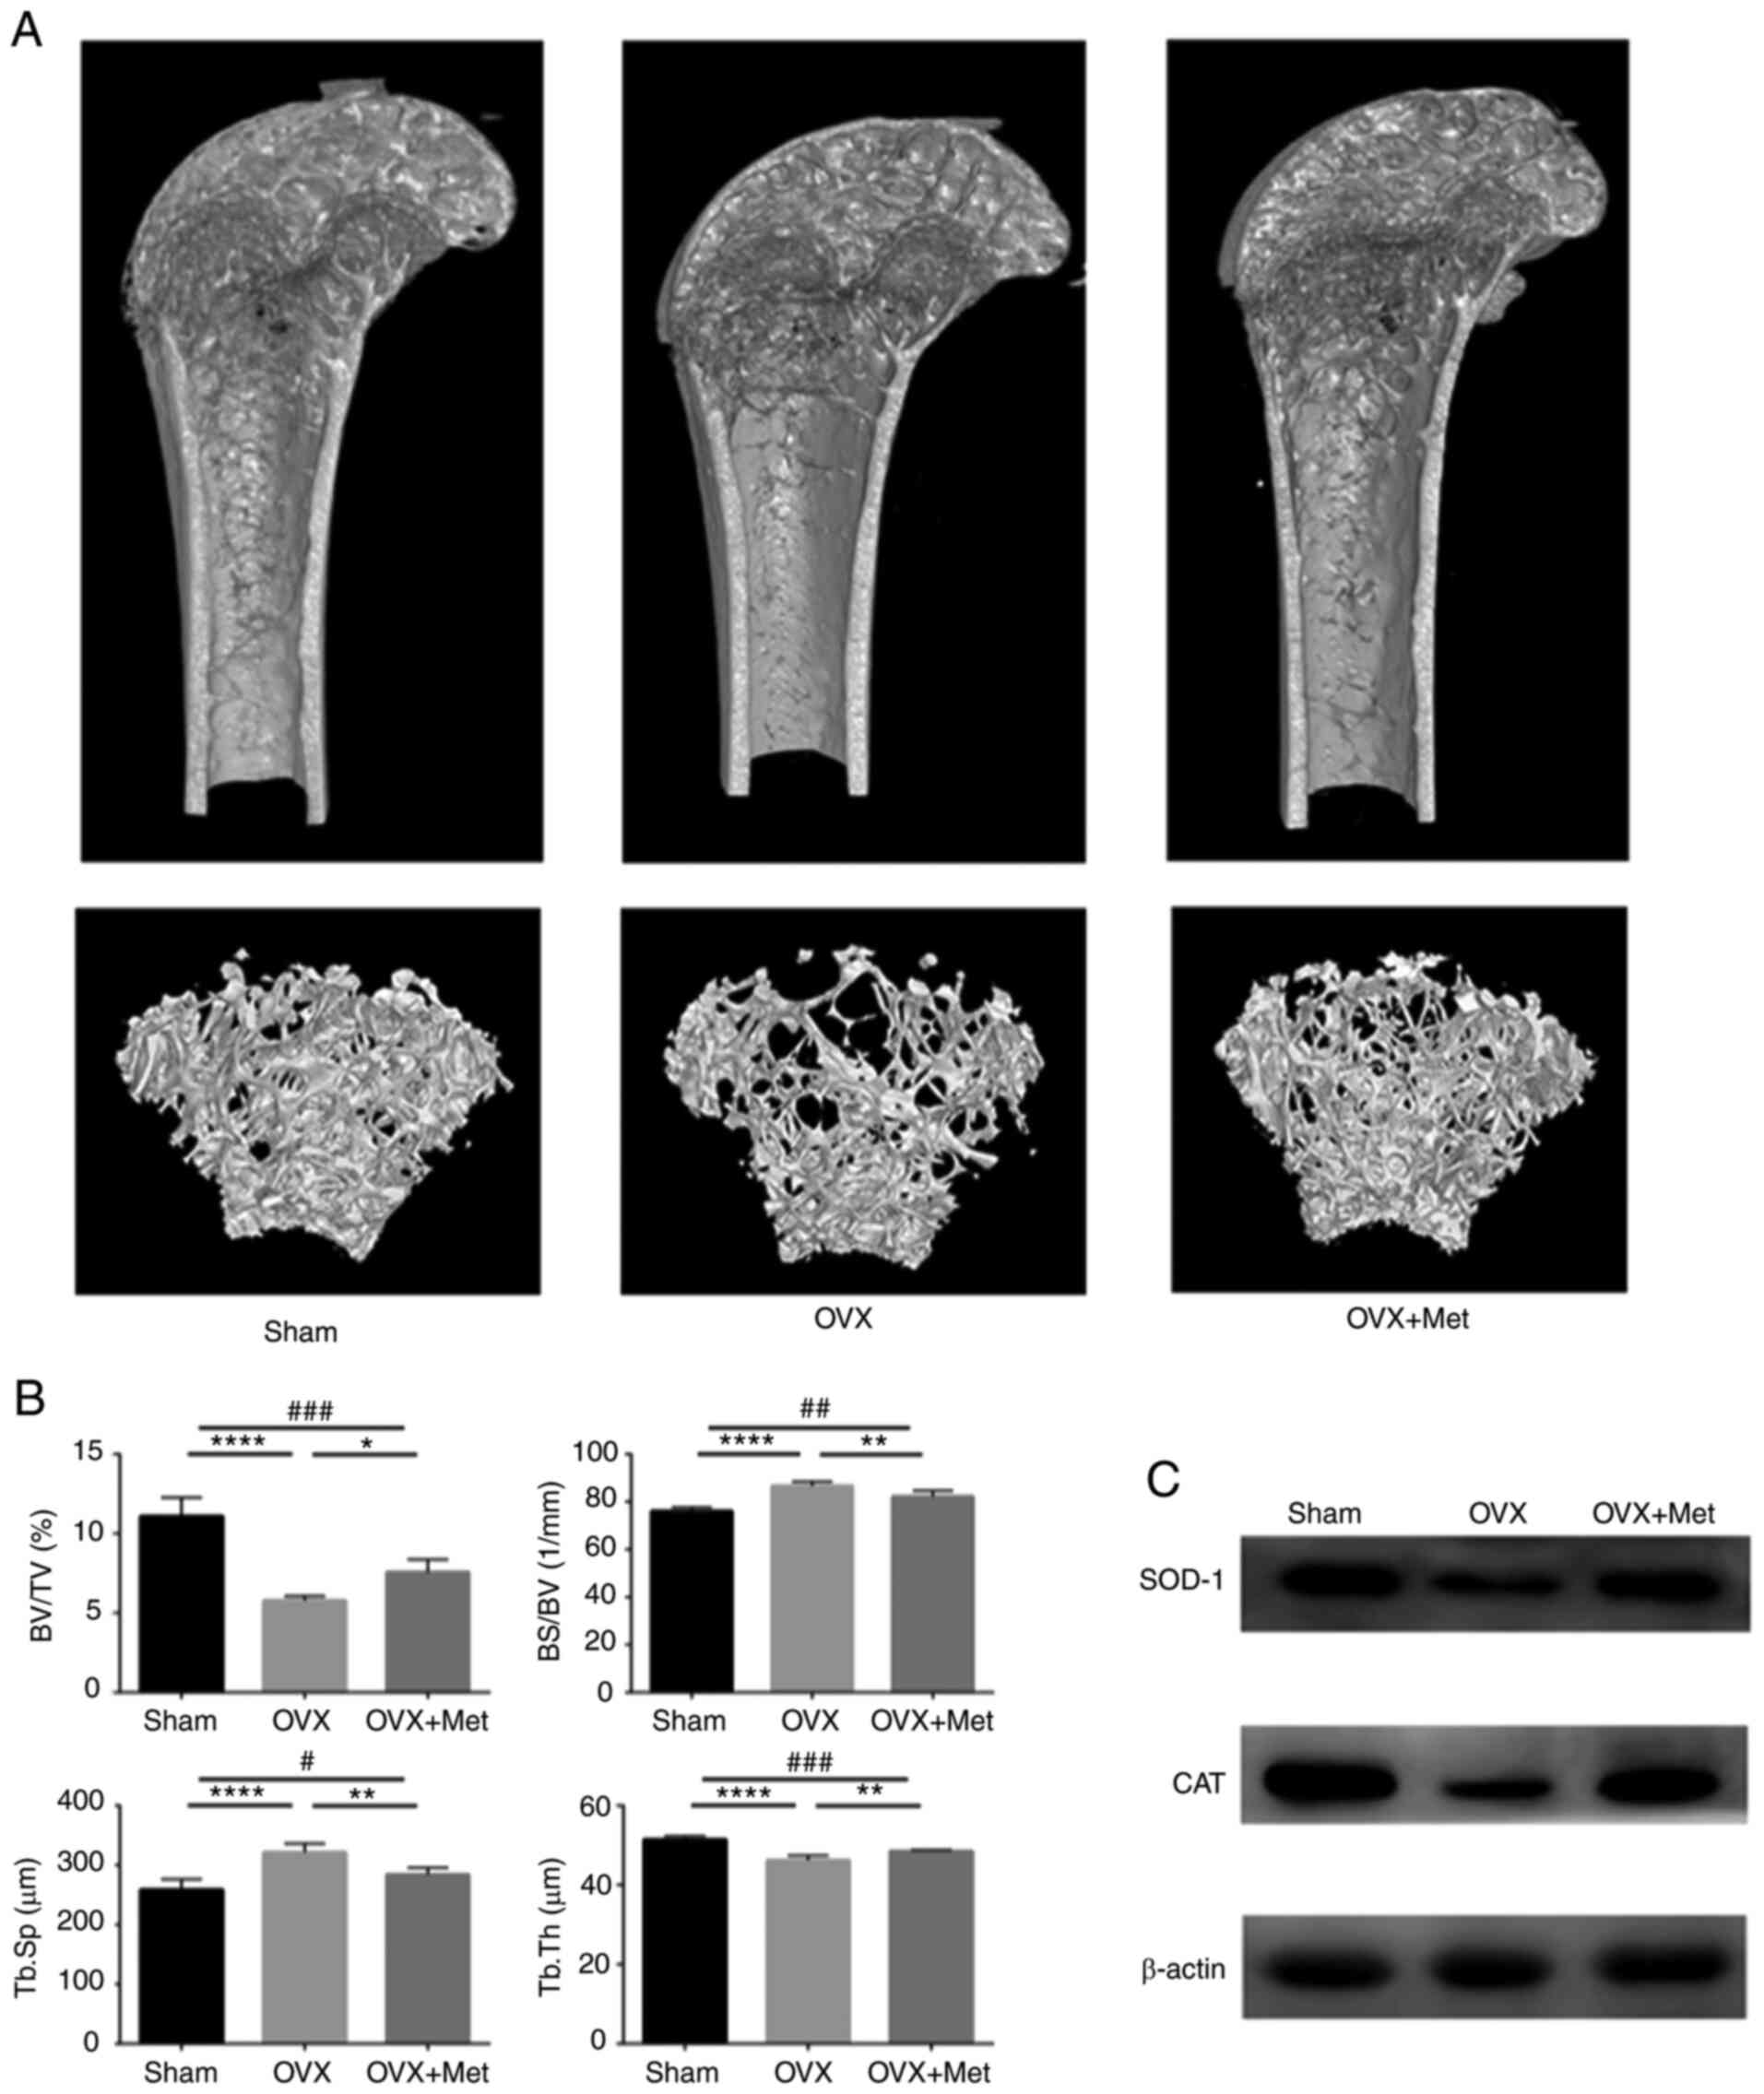 Micro-ct values of OWA (in mm2) (A) and CUR (B) among hominoid living